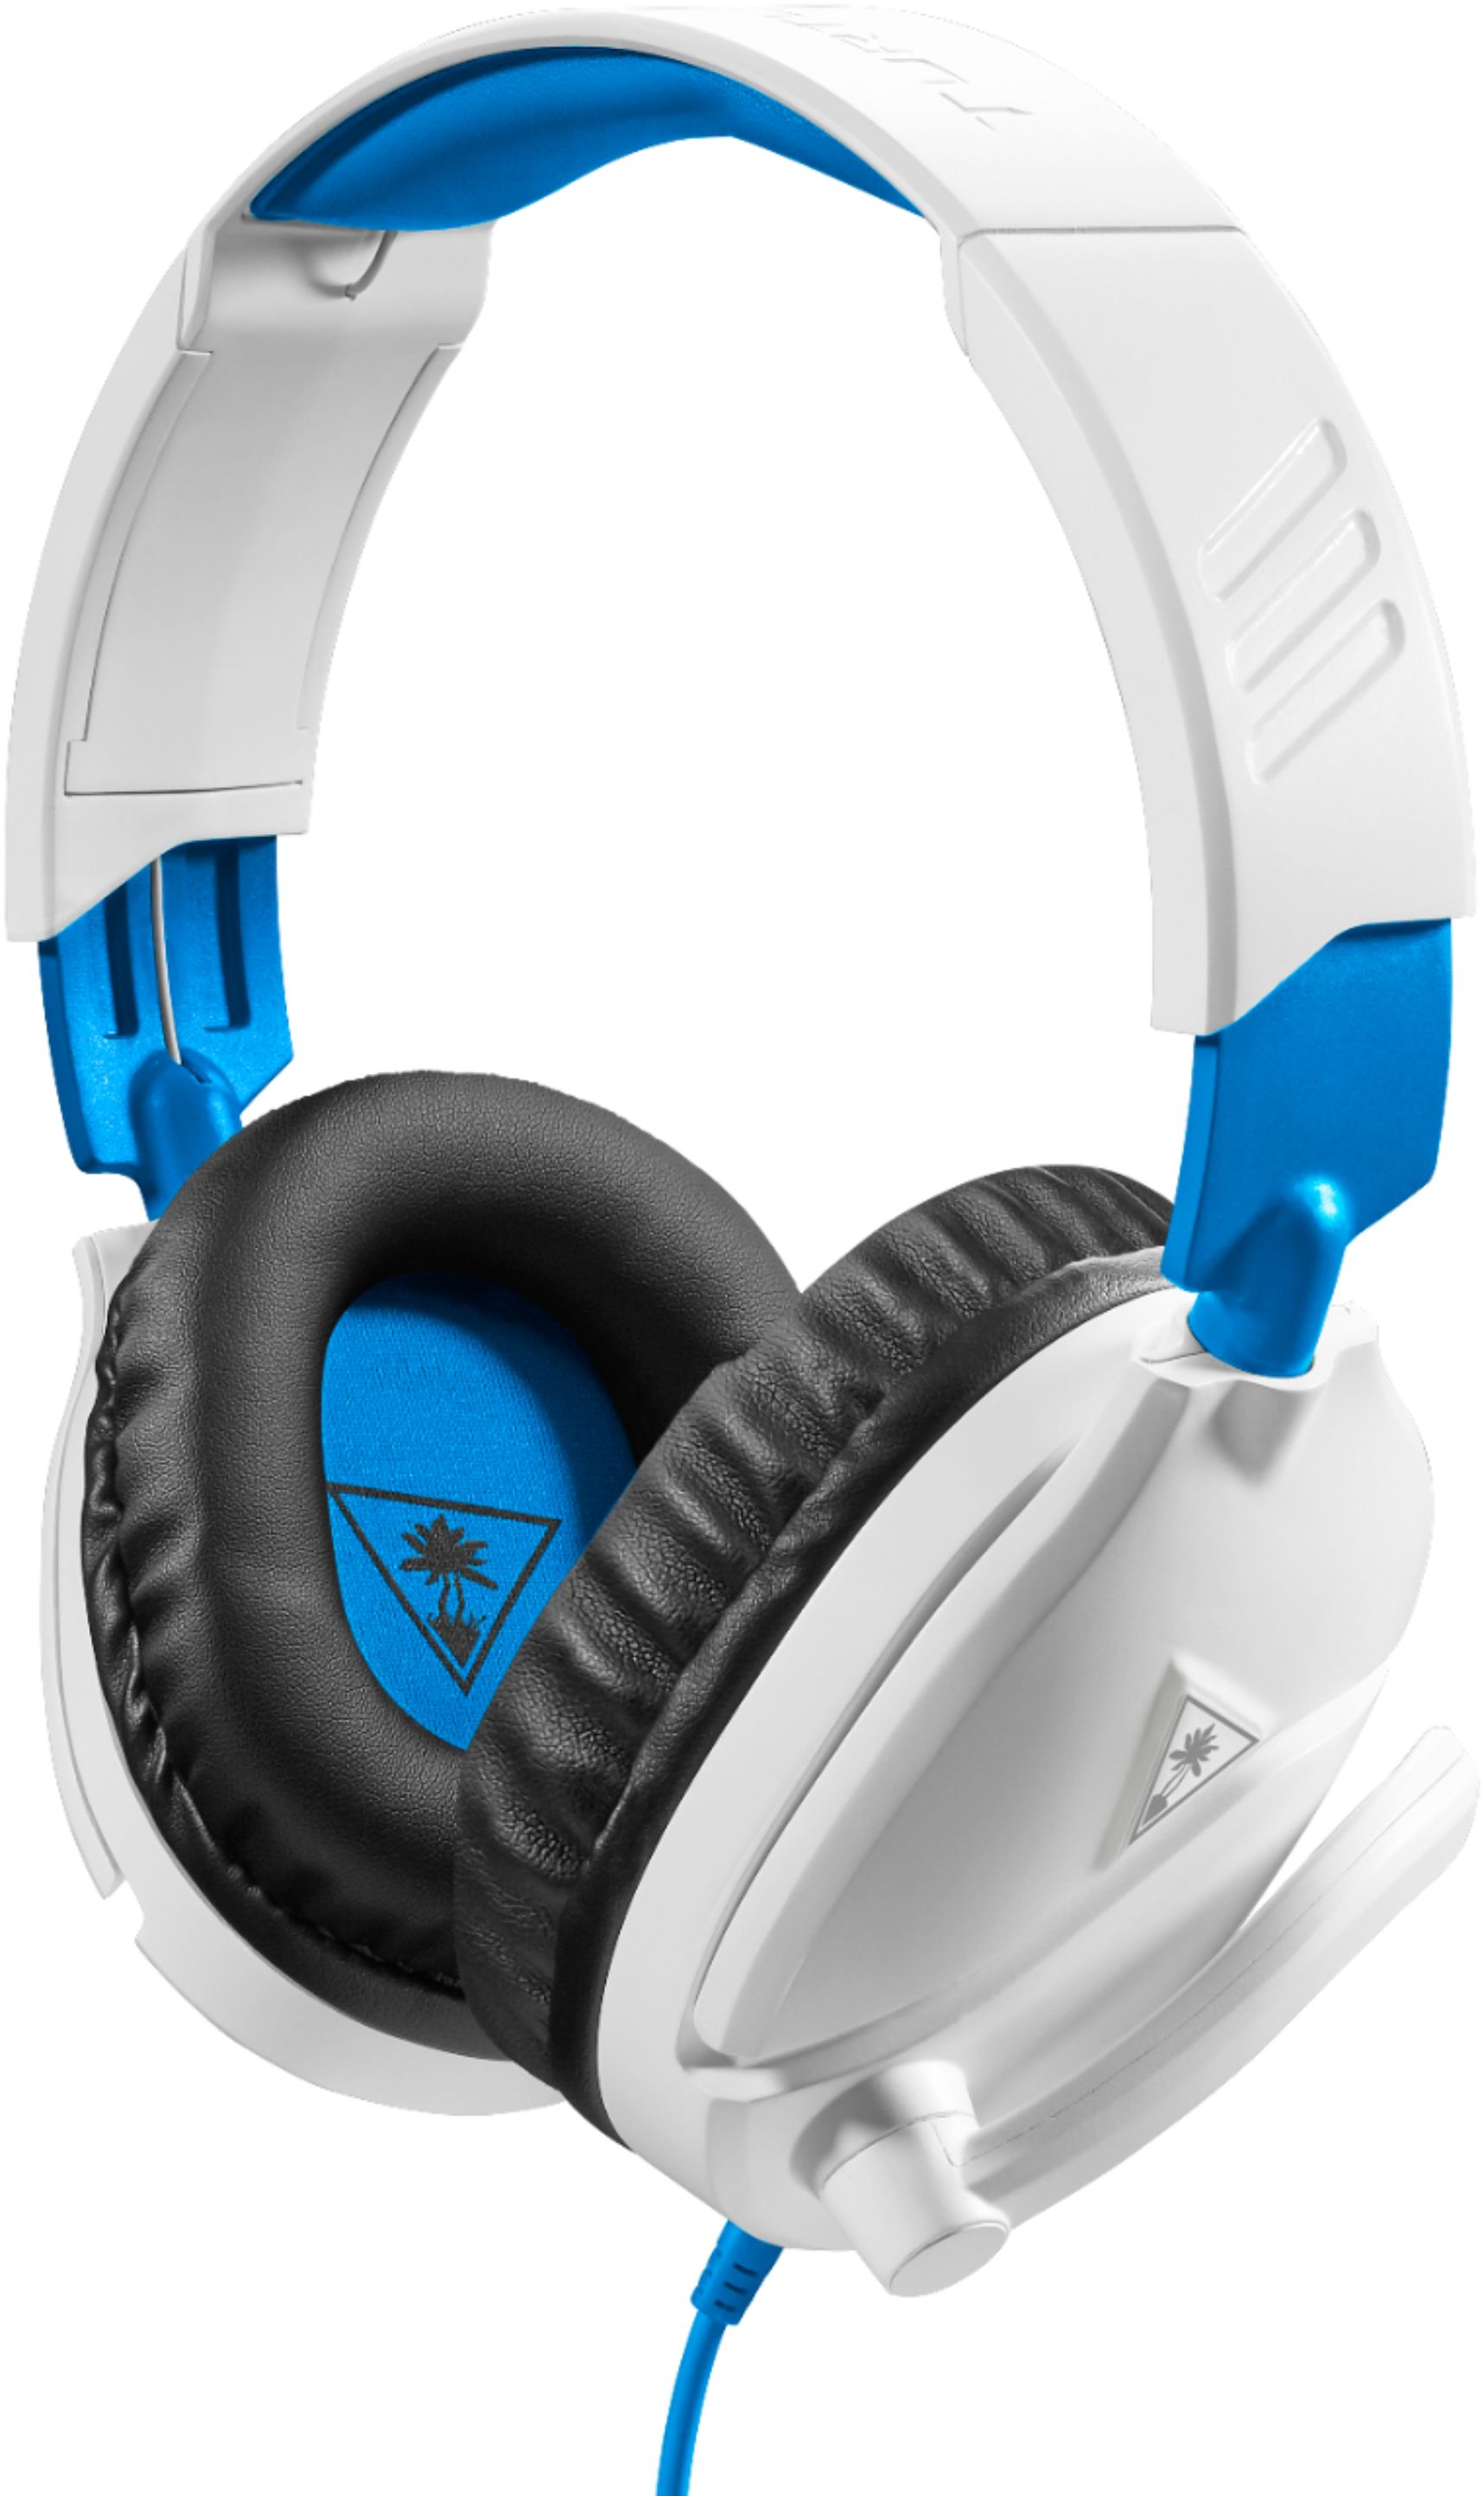 TBS-3455-01 70 Gaming for Beach Pro, Best & Recon PS4 Turtle Buy: Headset Wired PS5 PS4 Stereo White/Blue